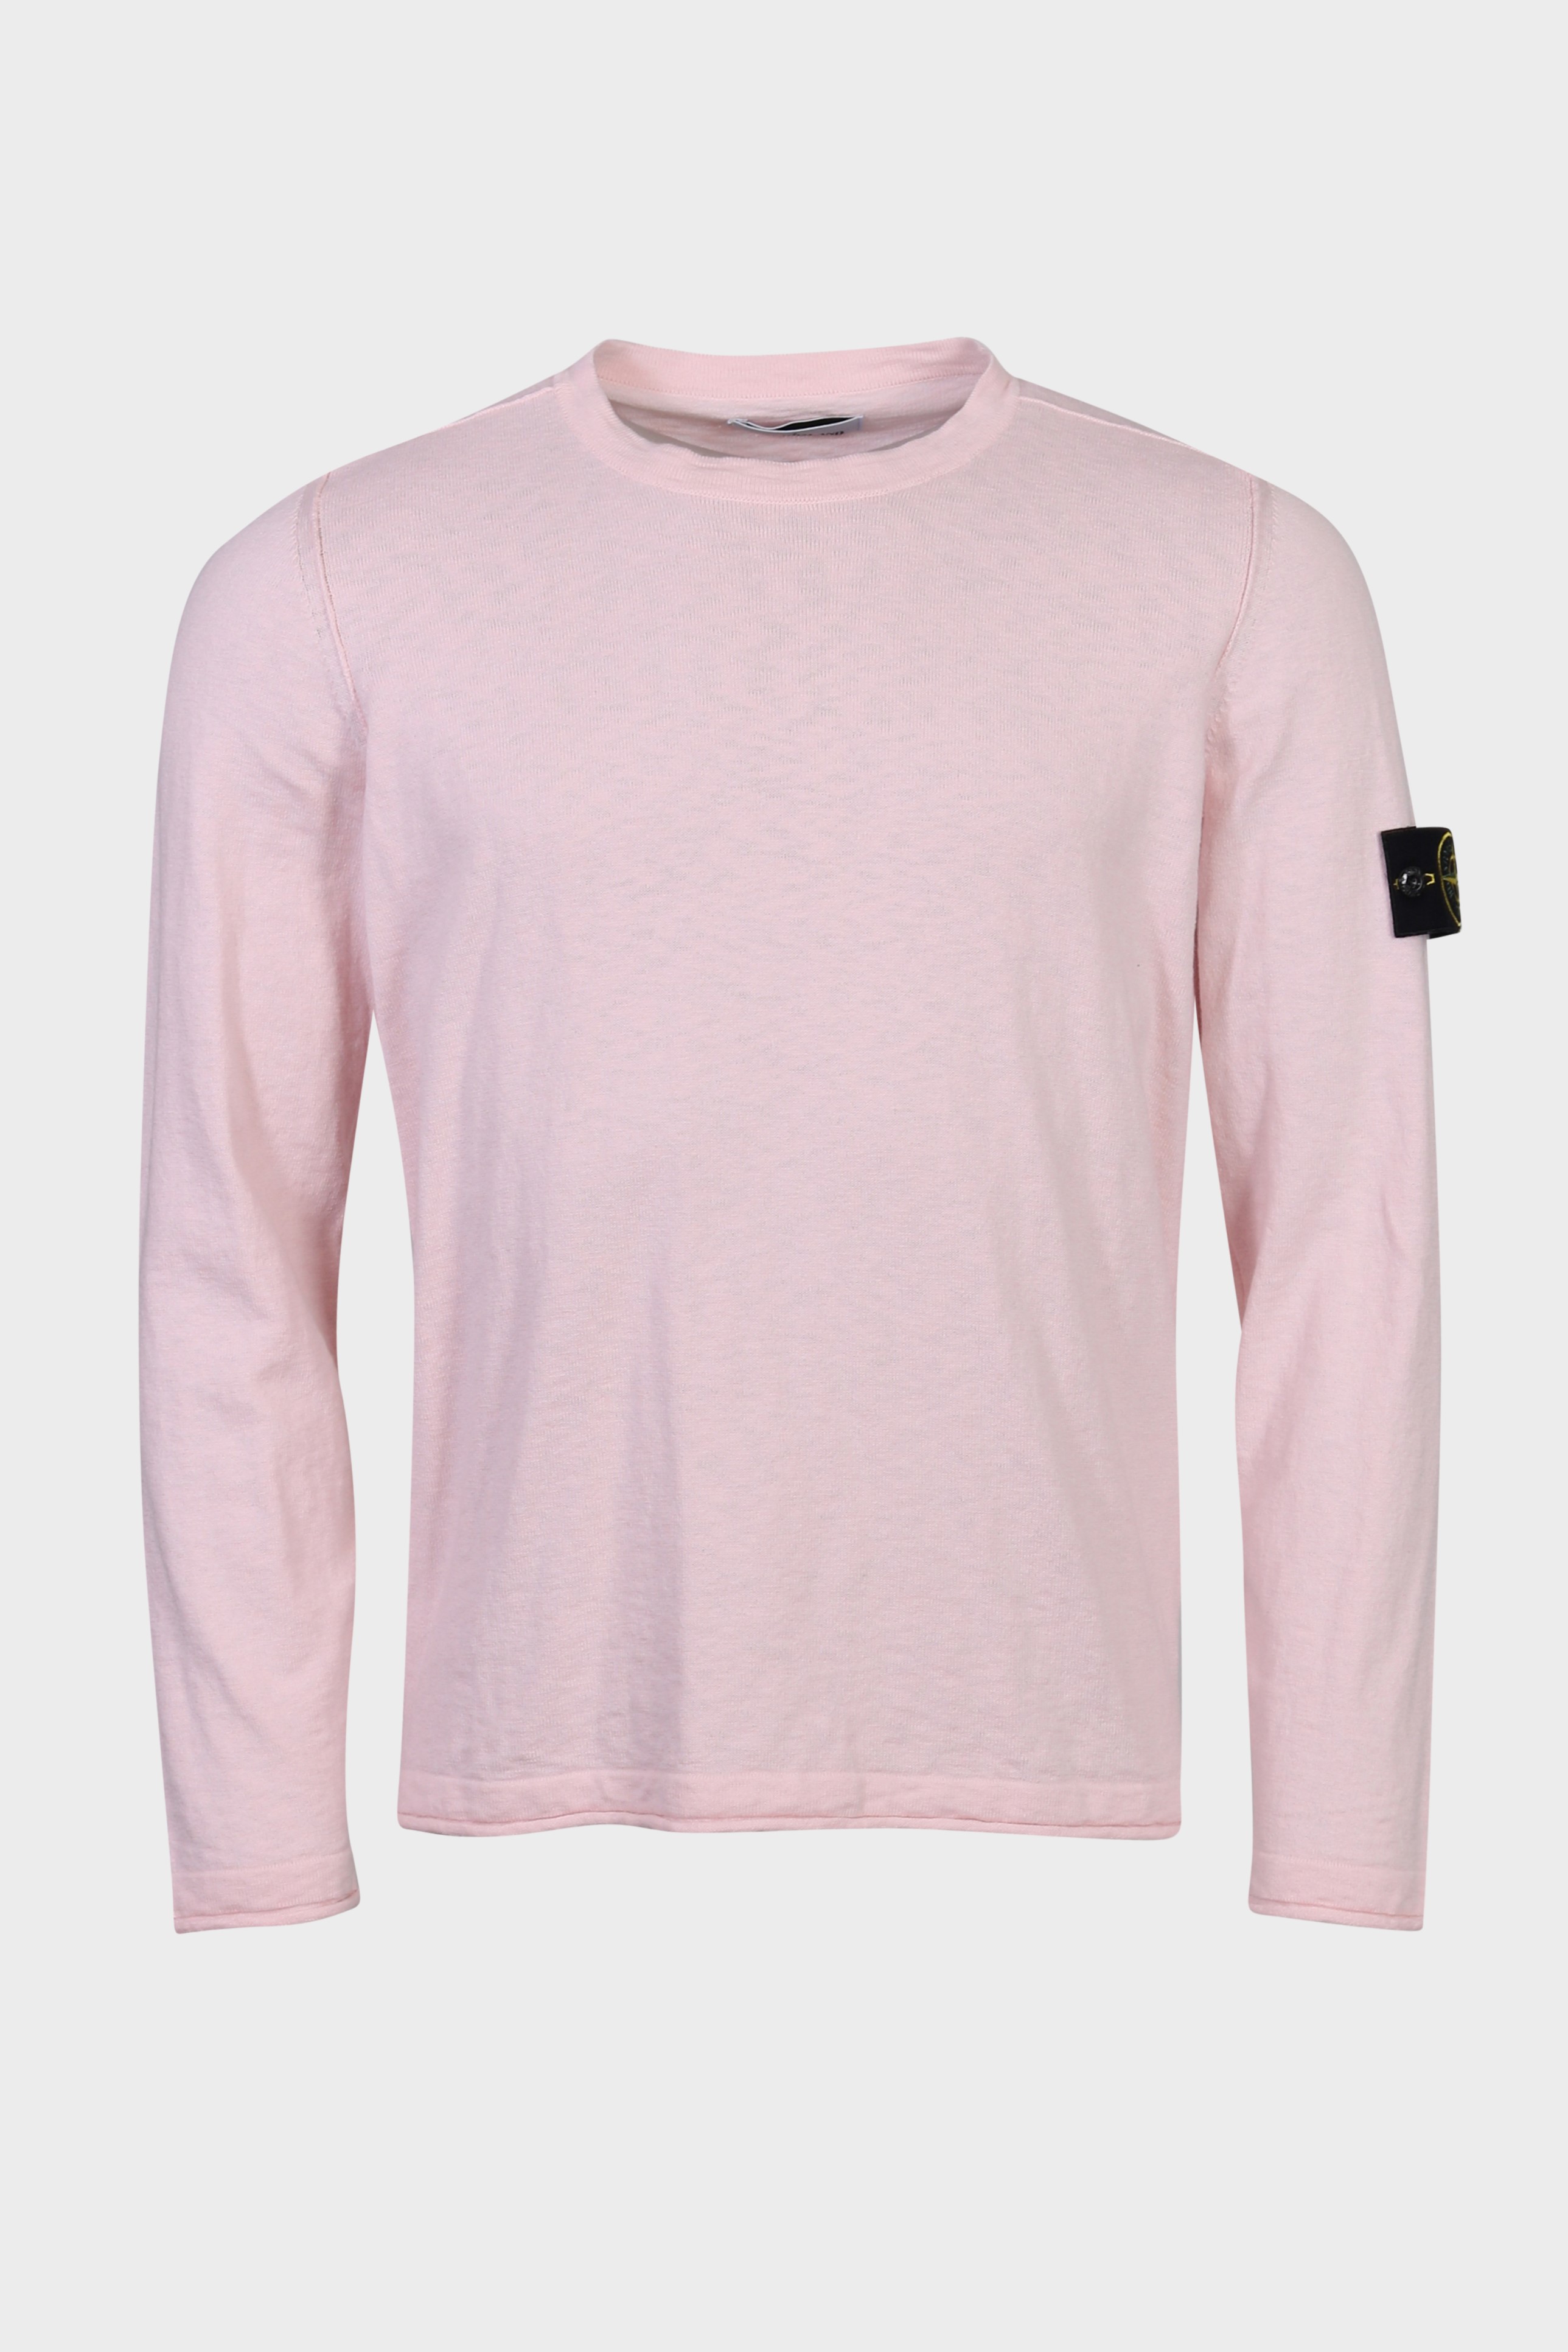 STONE ISLAND Summer Knit Pullover in Light Pink M